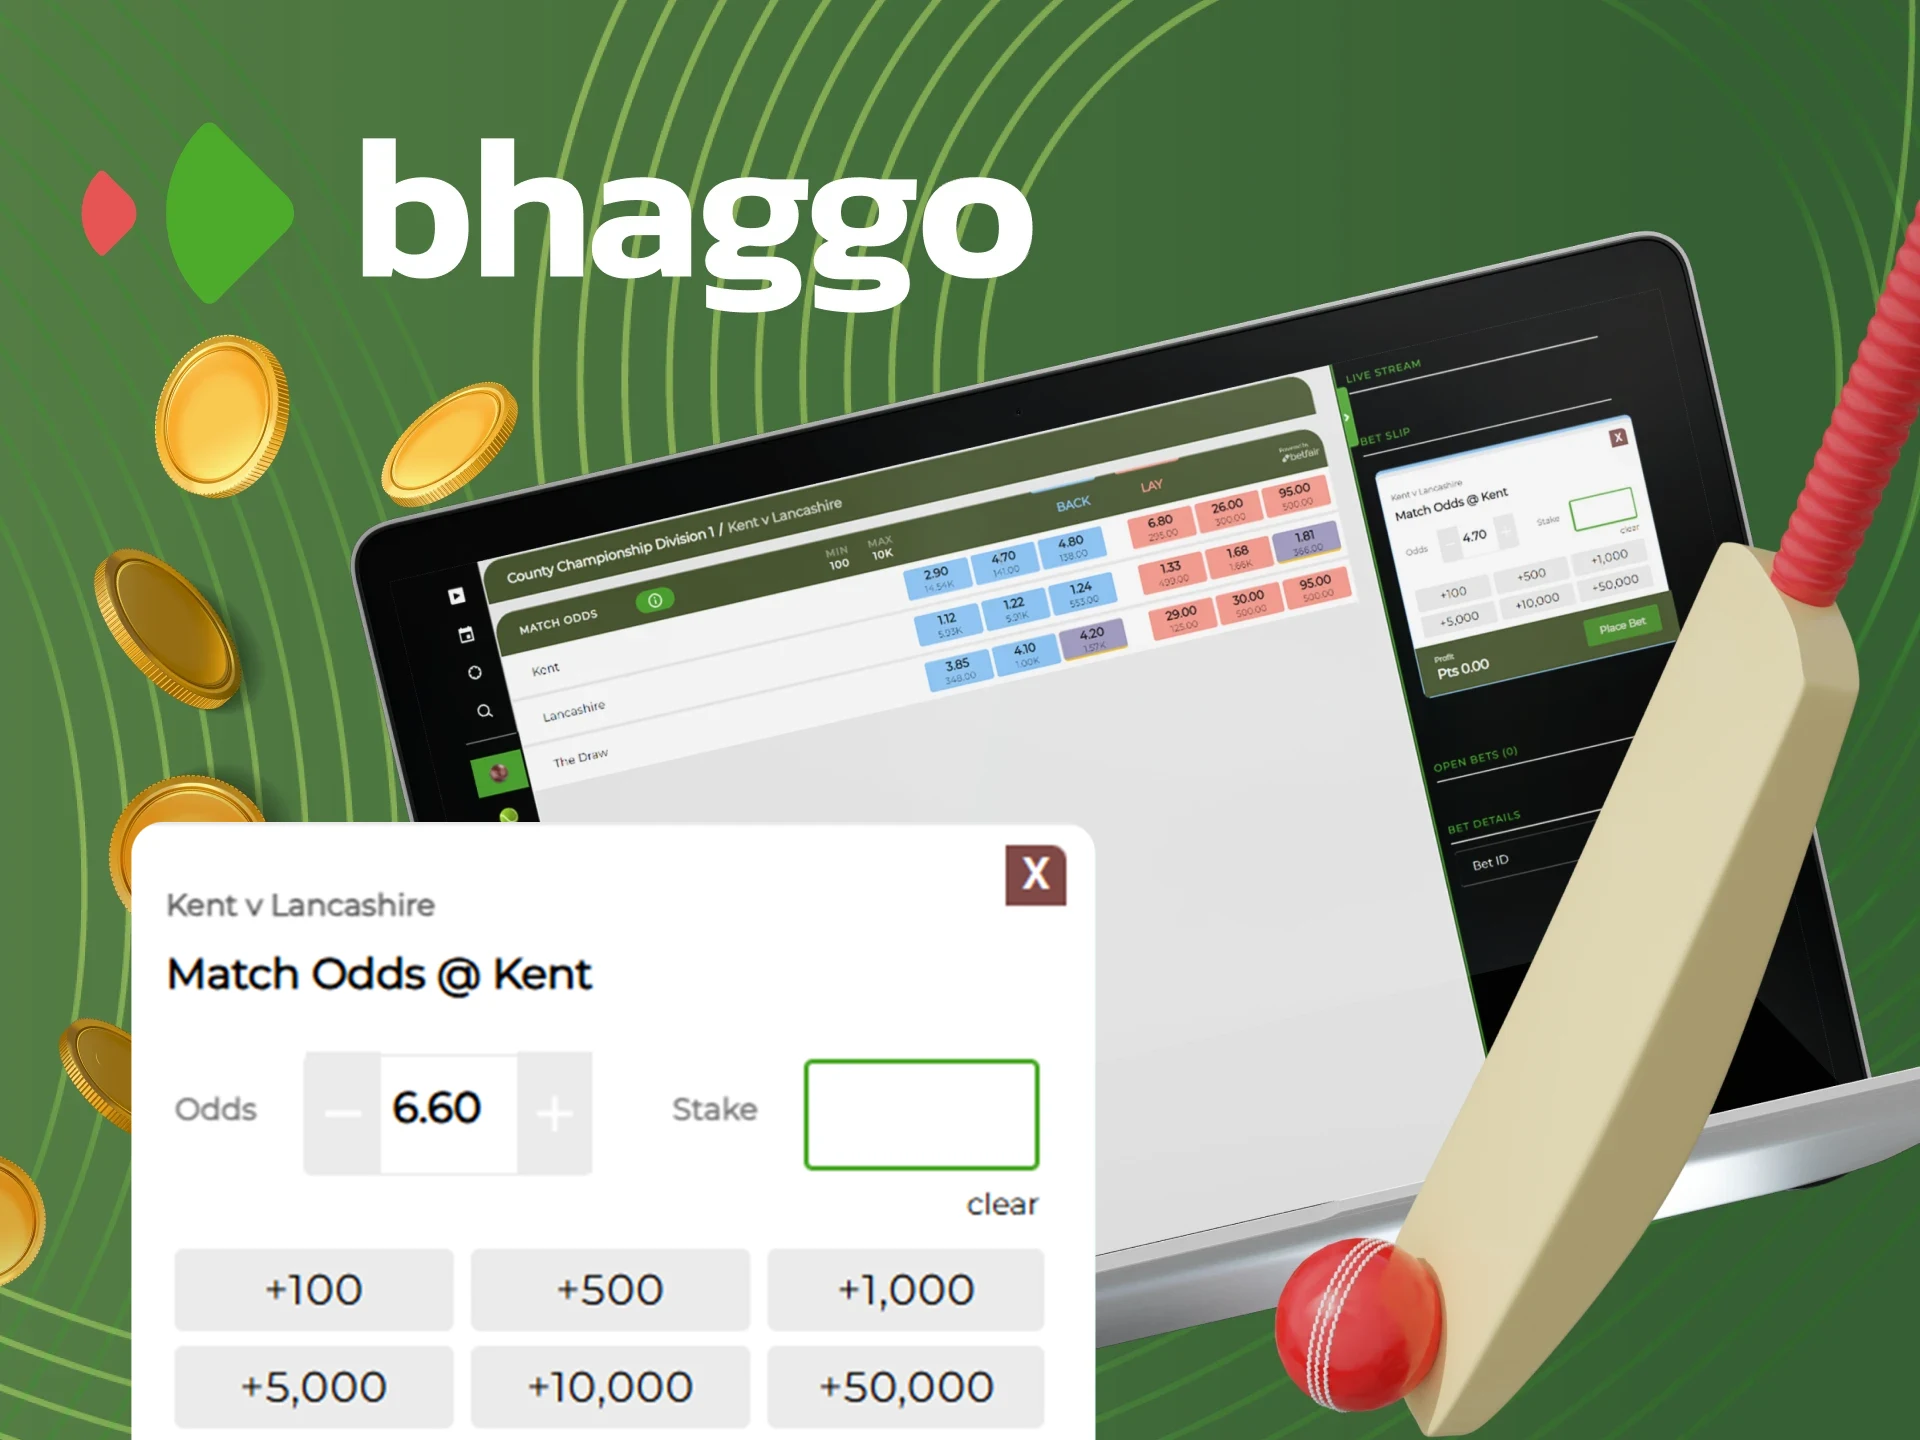 How to place a cricket bet at Bhaggo.